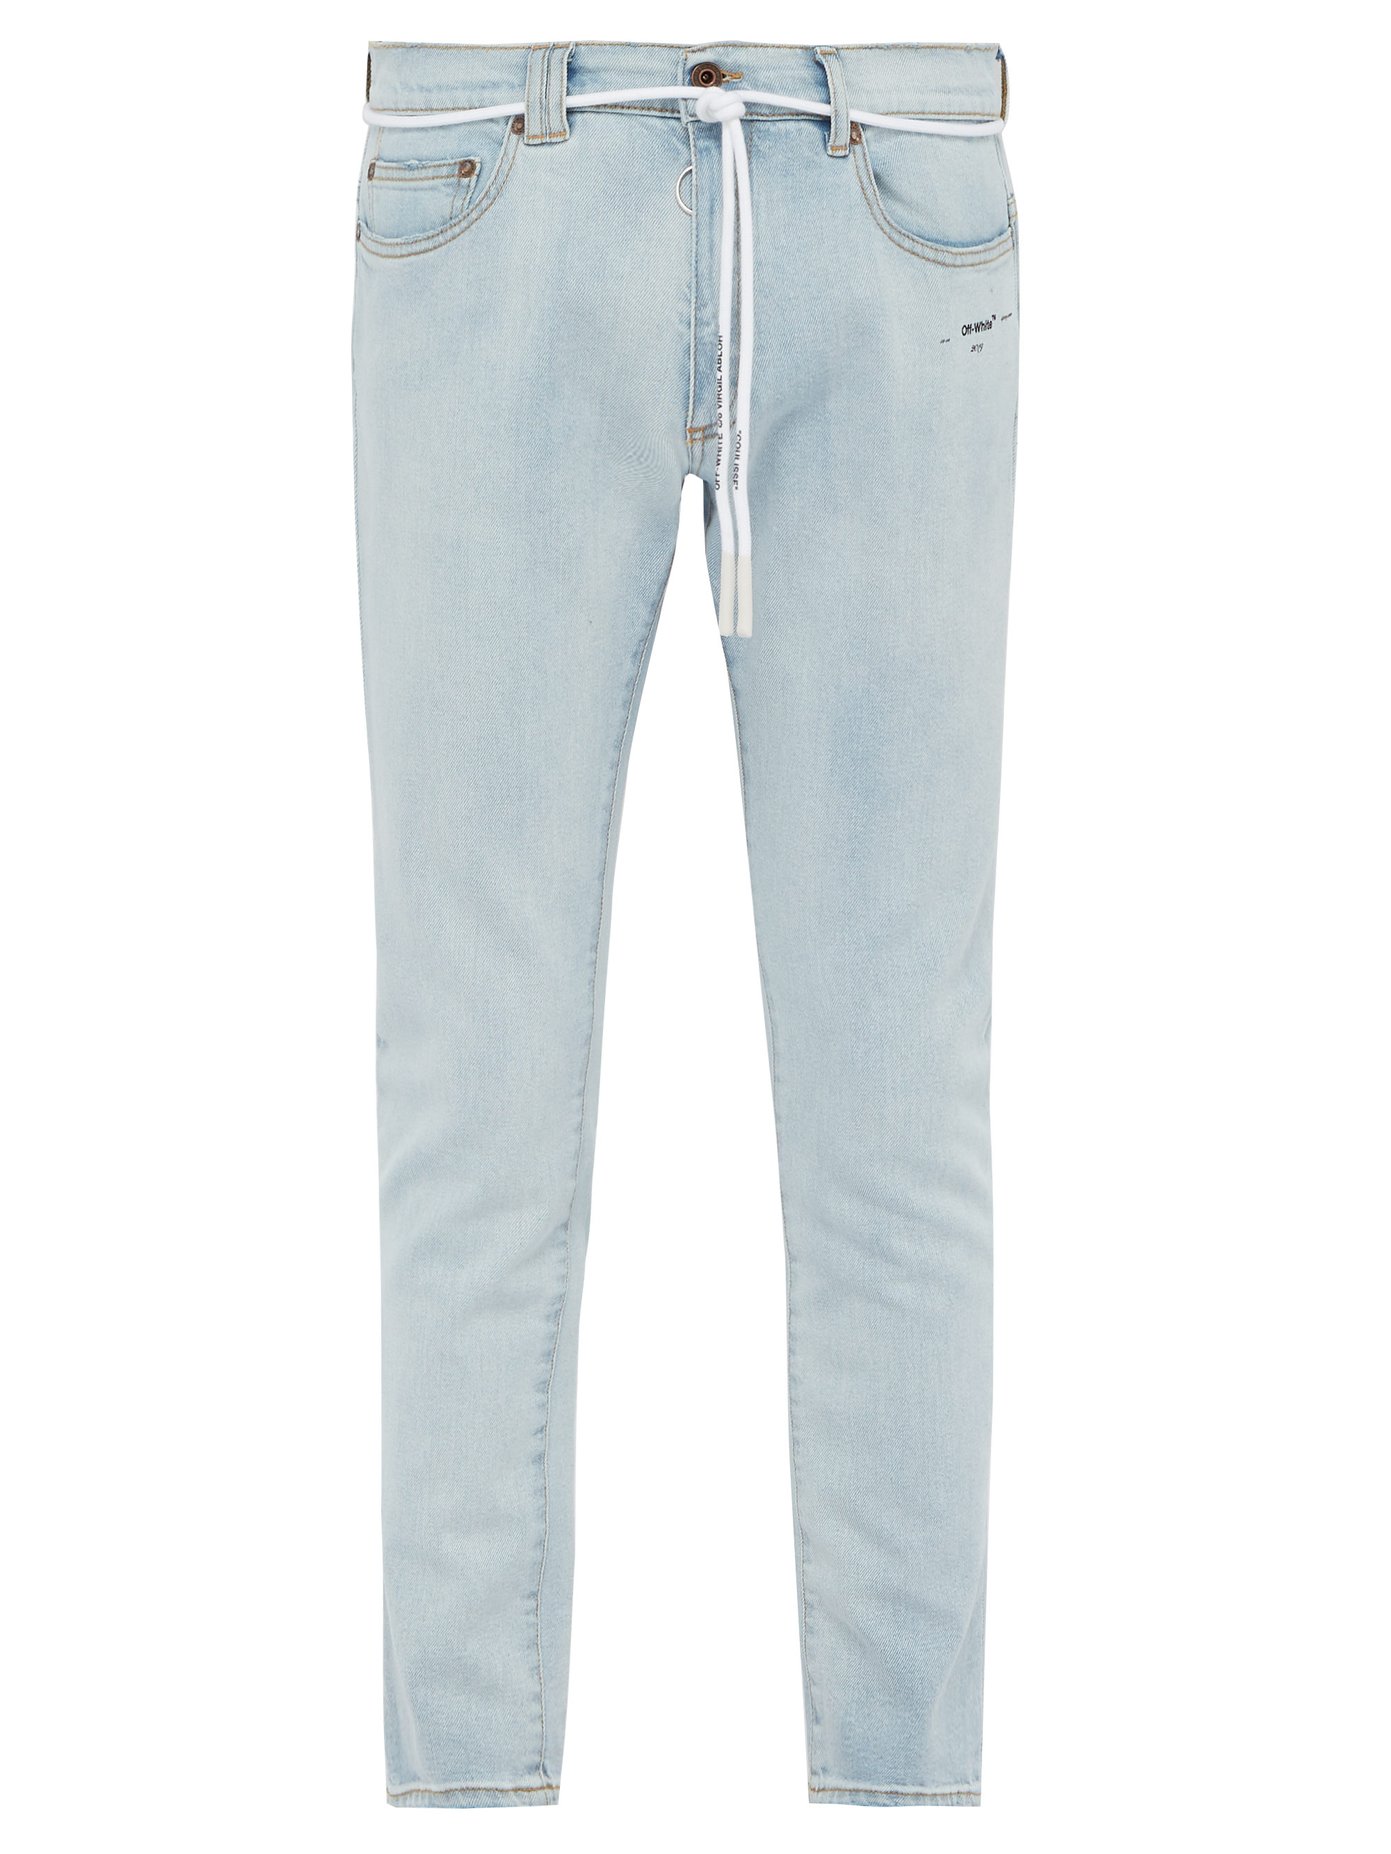 light blue and white jeans